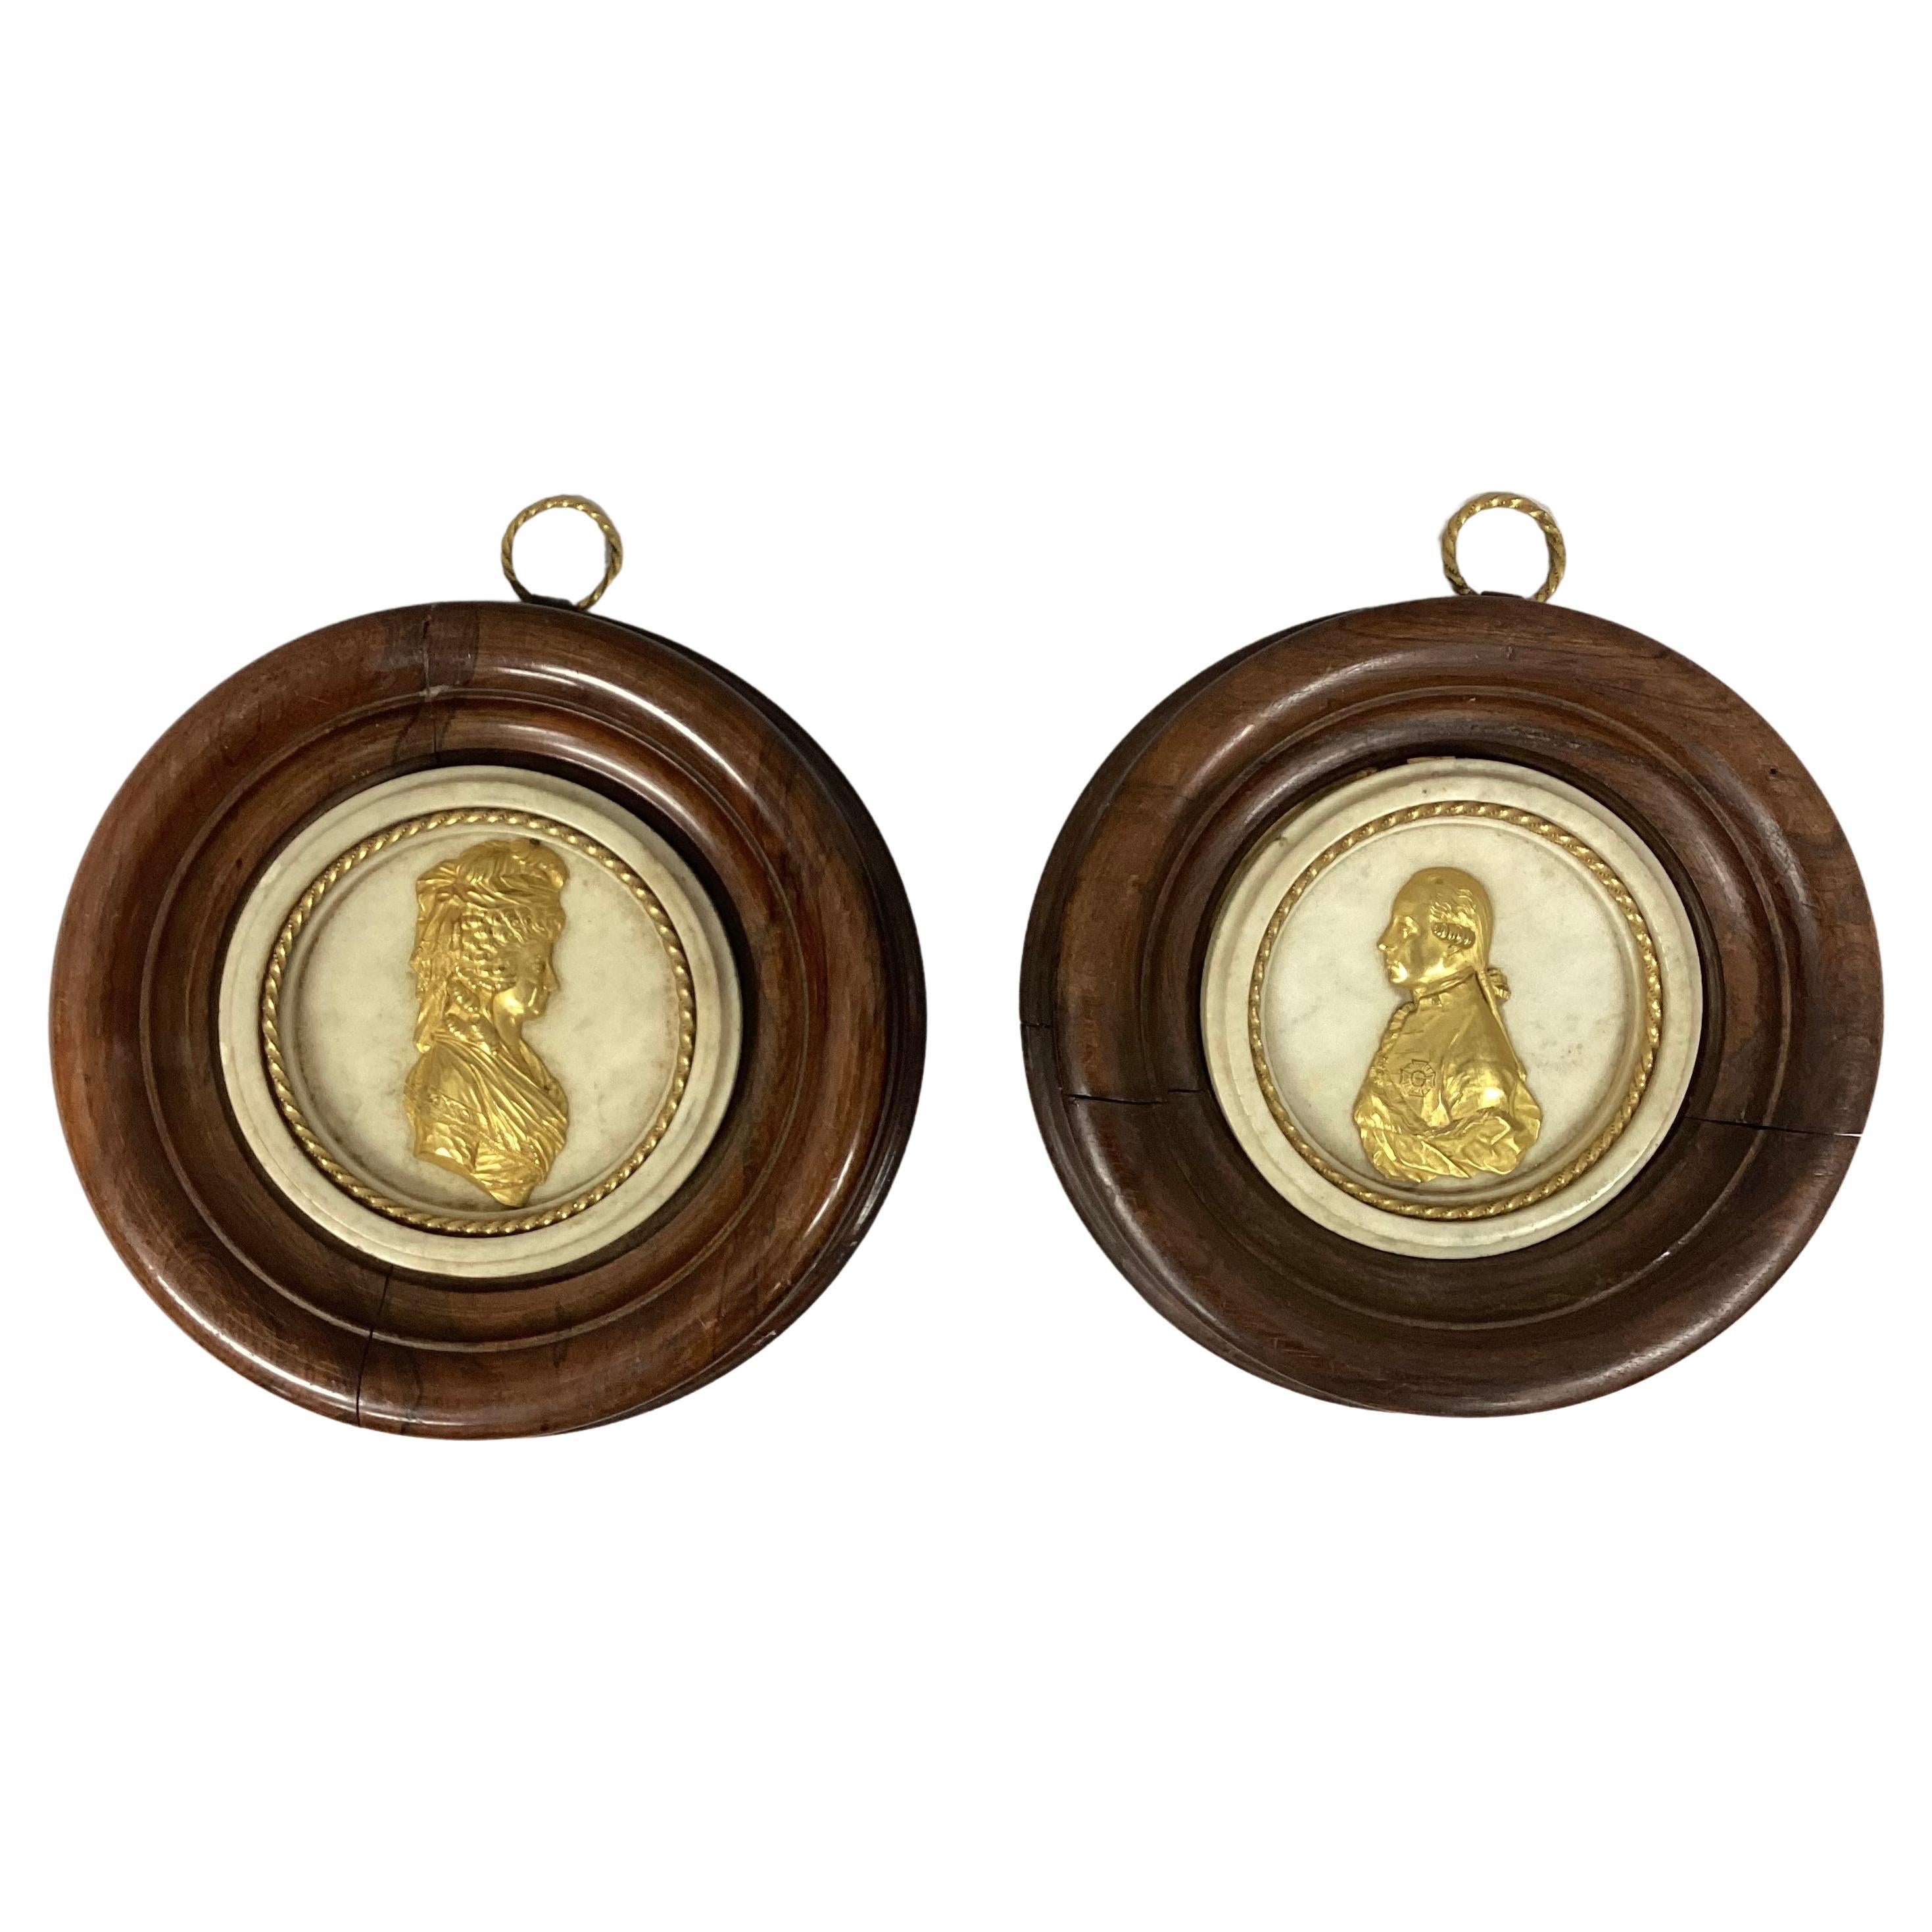 Pair Of 19th Century Doré Bronze Portrait Medallions Mounted on Carrara Marble For Sale